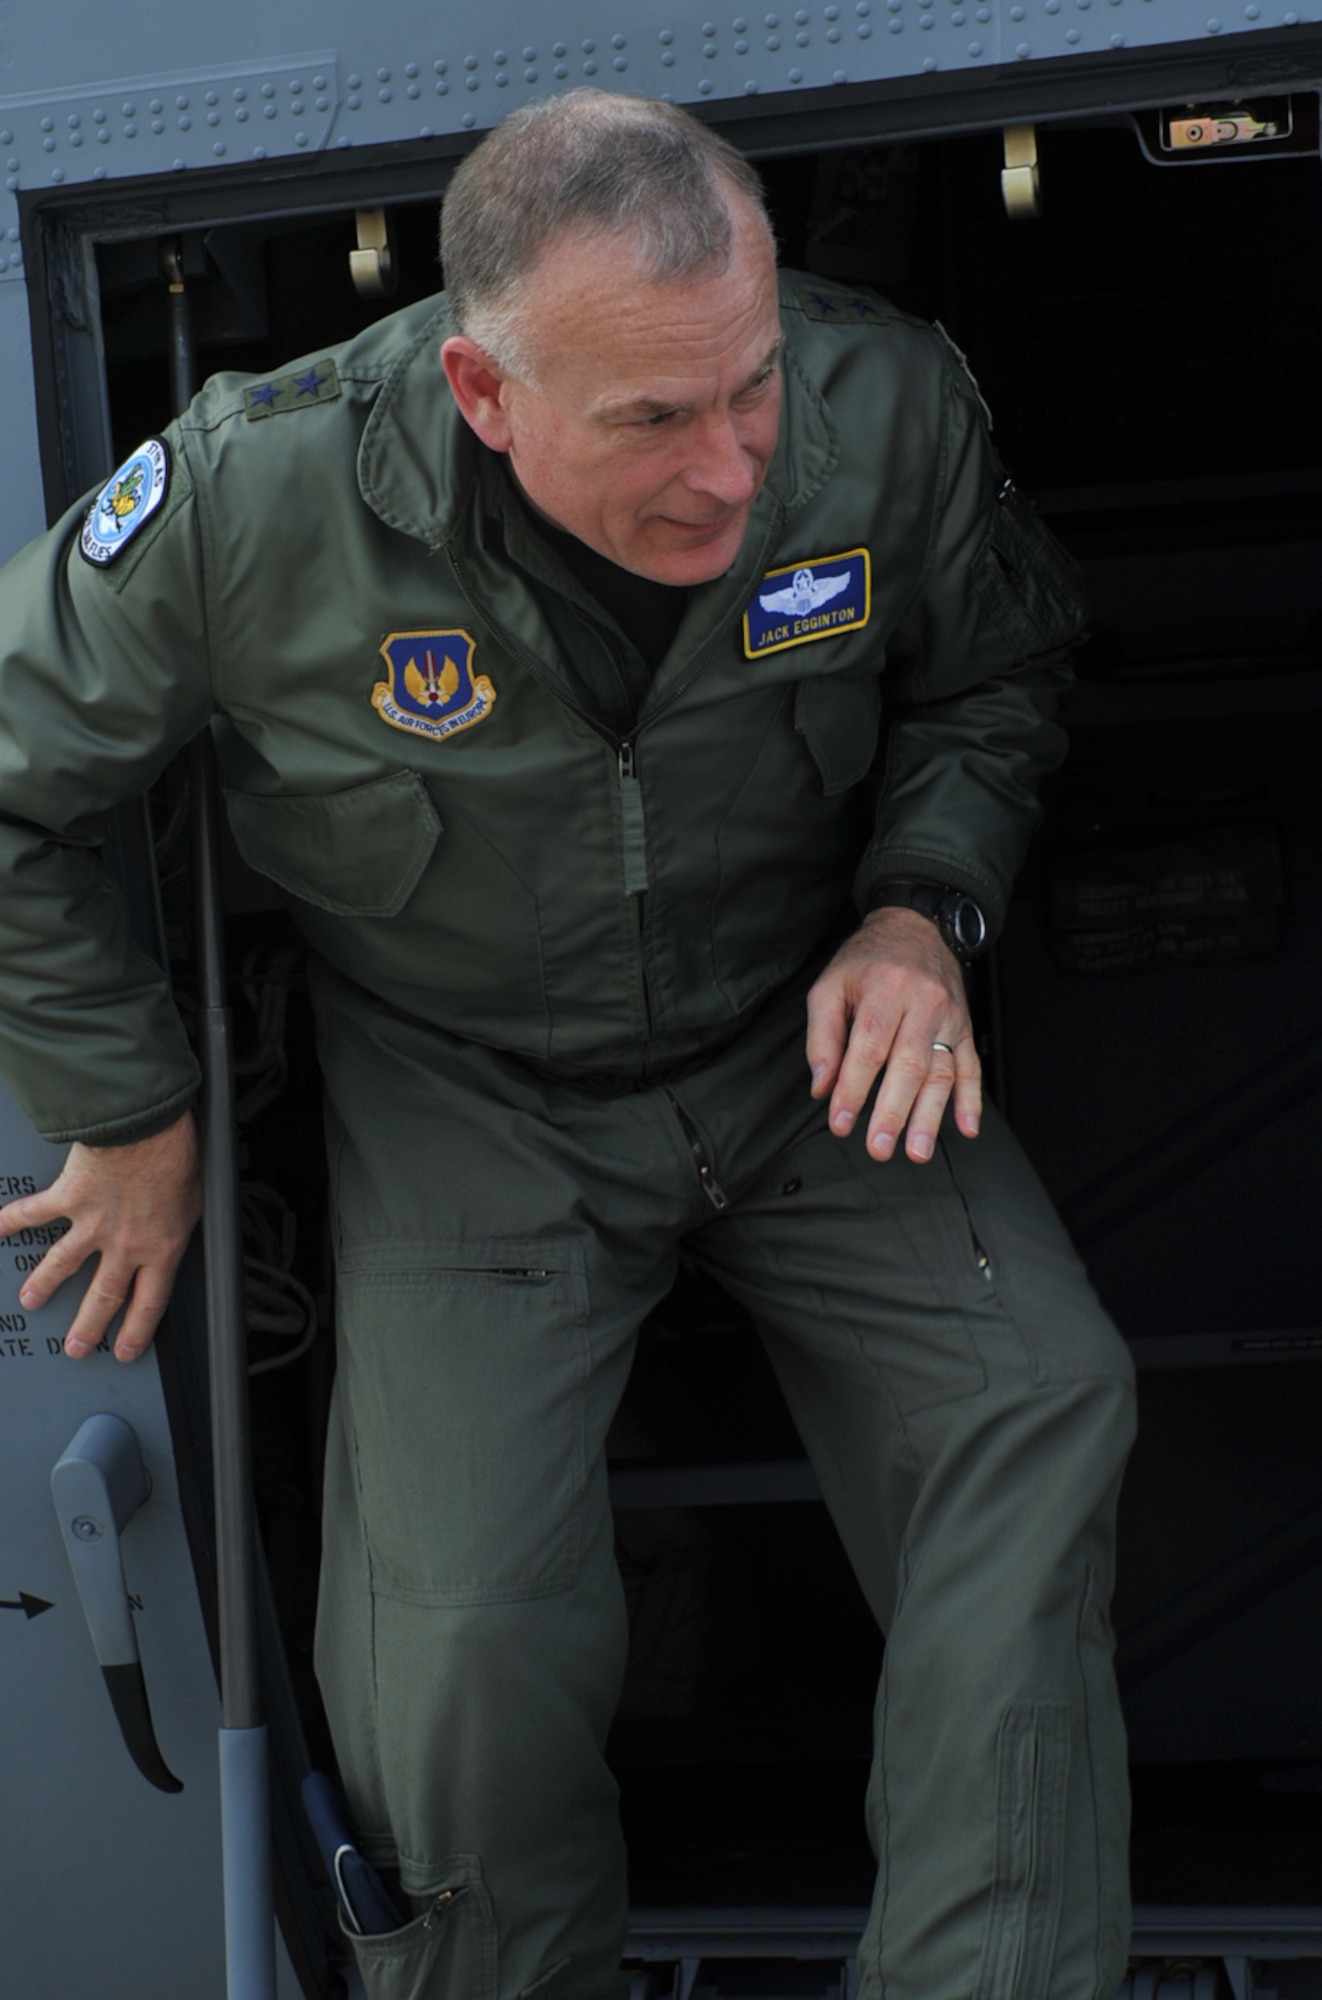 Maj. Gen. Jack Egginton, Director, Air and Space Operations, Headquarters U.S. Air Forces in Europe steps off Ramstein's 13th C-130J Super Hercules after piloting it in, Ramstein Air Base, Germany, March 30, 2010. Fourteen C-130J models will be assigned to Ramstein, replacing the older C-130Es as a part of the Air Force’s priority to revitalize the aircraft fleet. (U.S. Air Force photo by Senior Airman Tony R. Ritter)